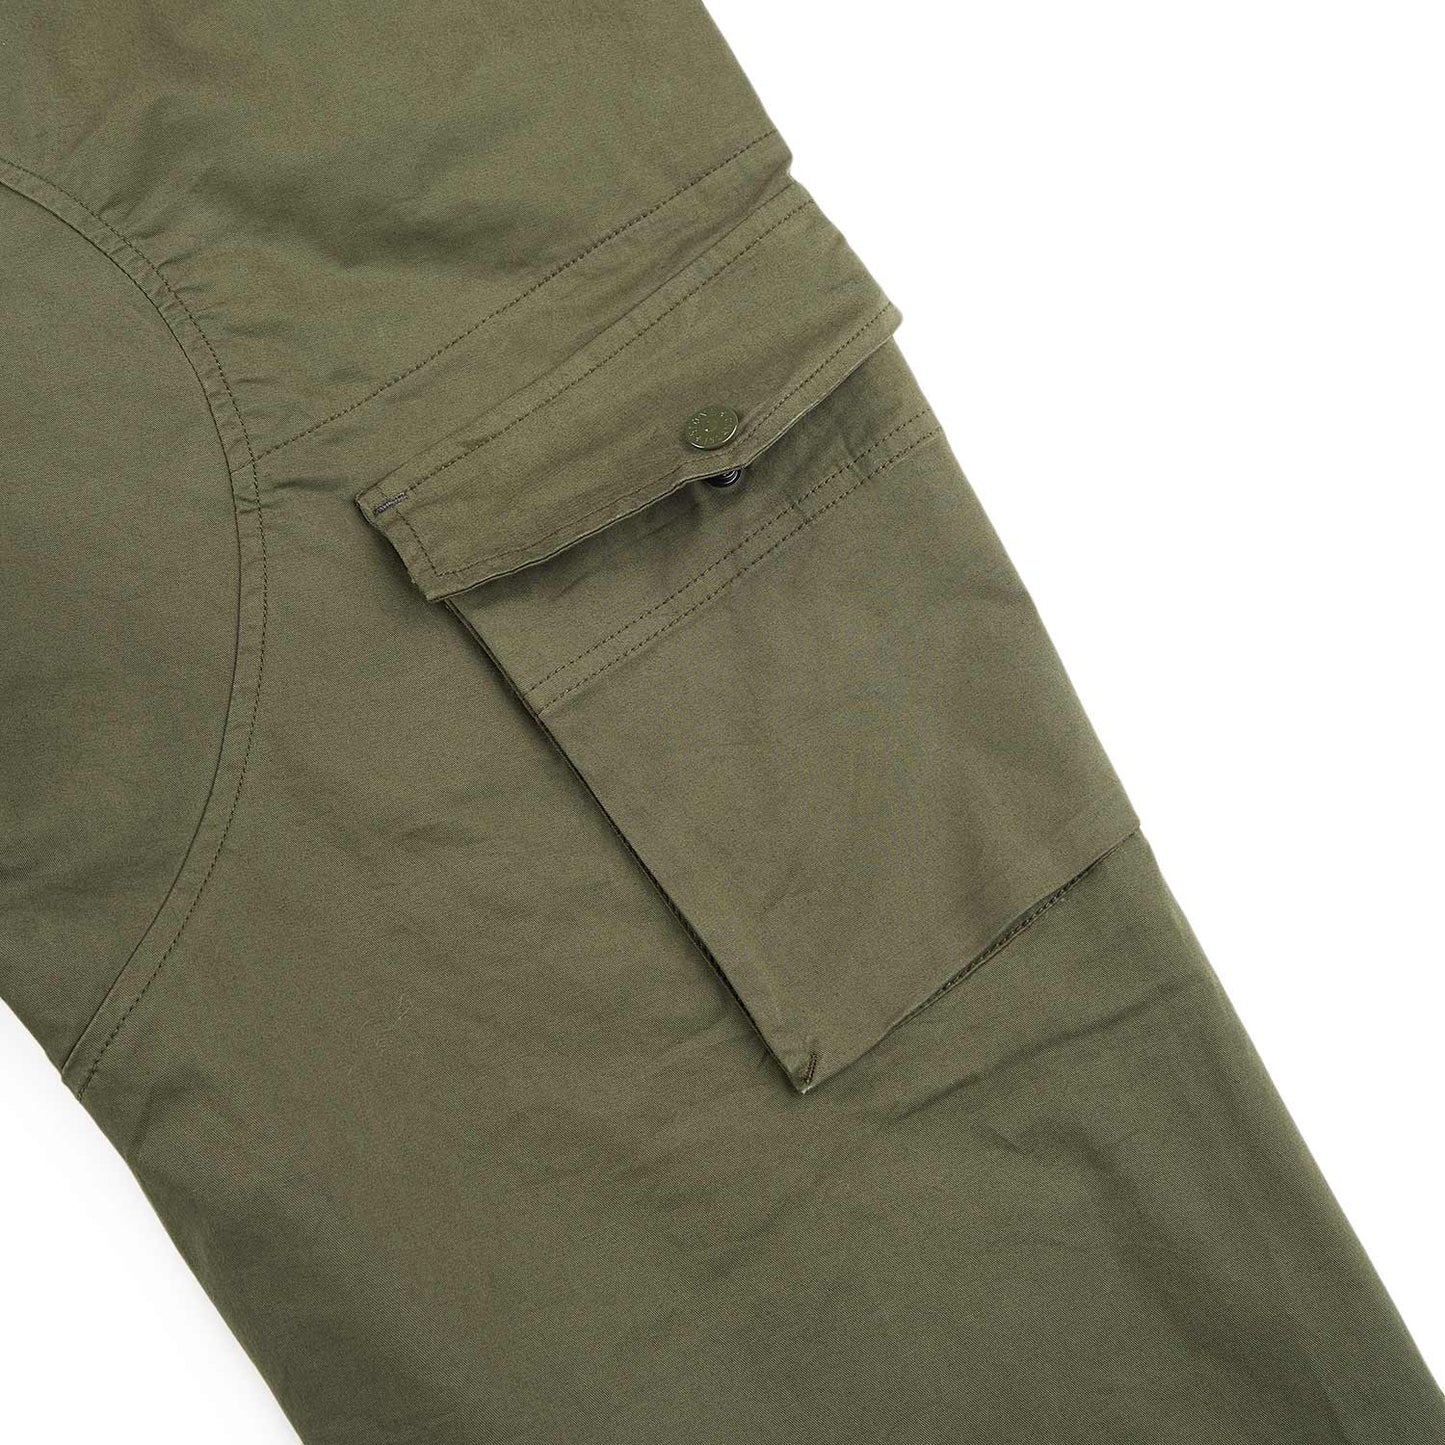 stone island ghost piece cargo pants (olive)